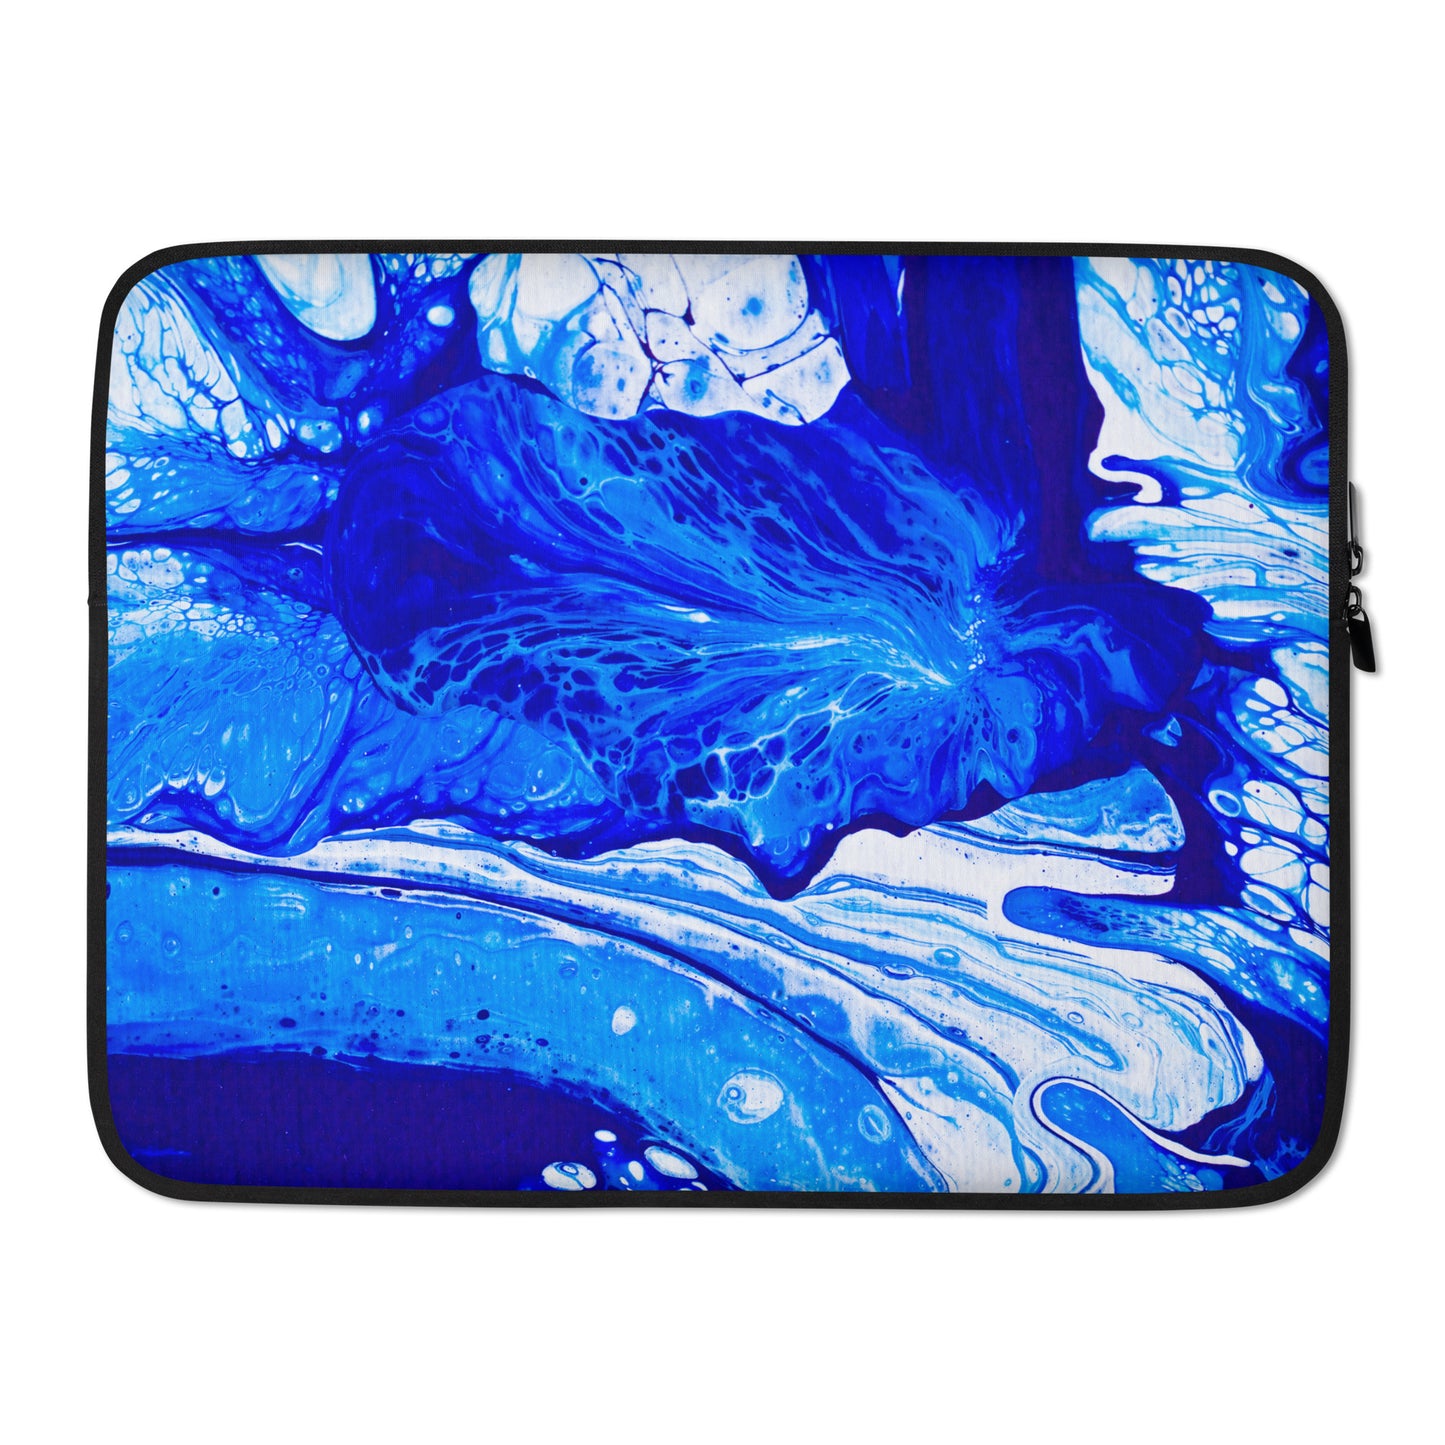 NightOwl Studio Padded Laptop Sleeve with Faux Fur Lining, 13 and 15 Inch Covers for Portable Computers and Large Tablets, Slim and Portable Neoprene for Work, Travel, or Gaming, Ms. Blue